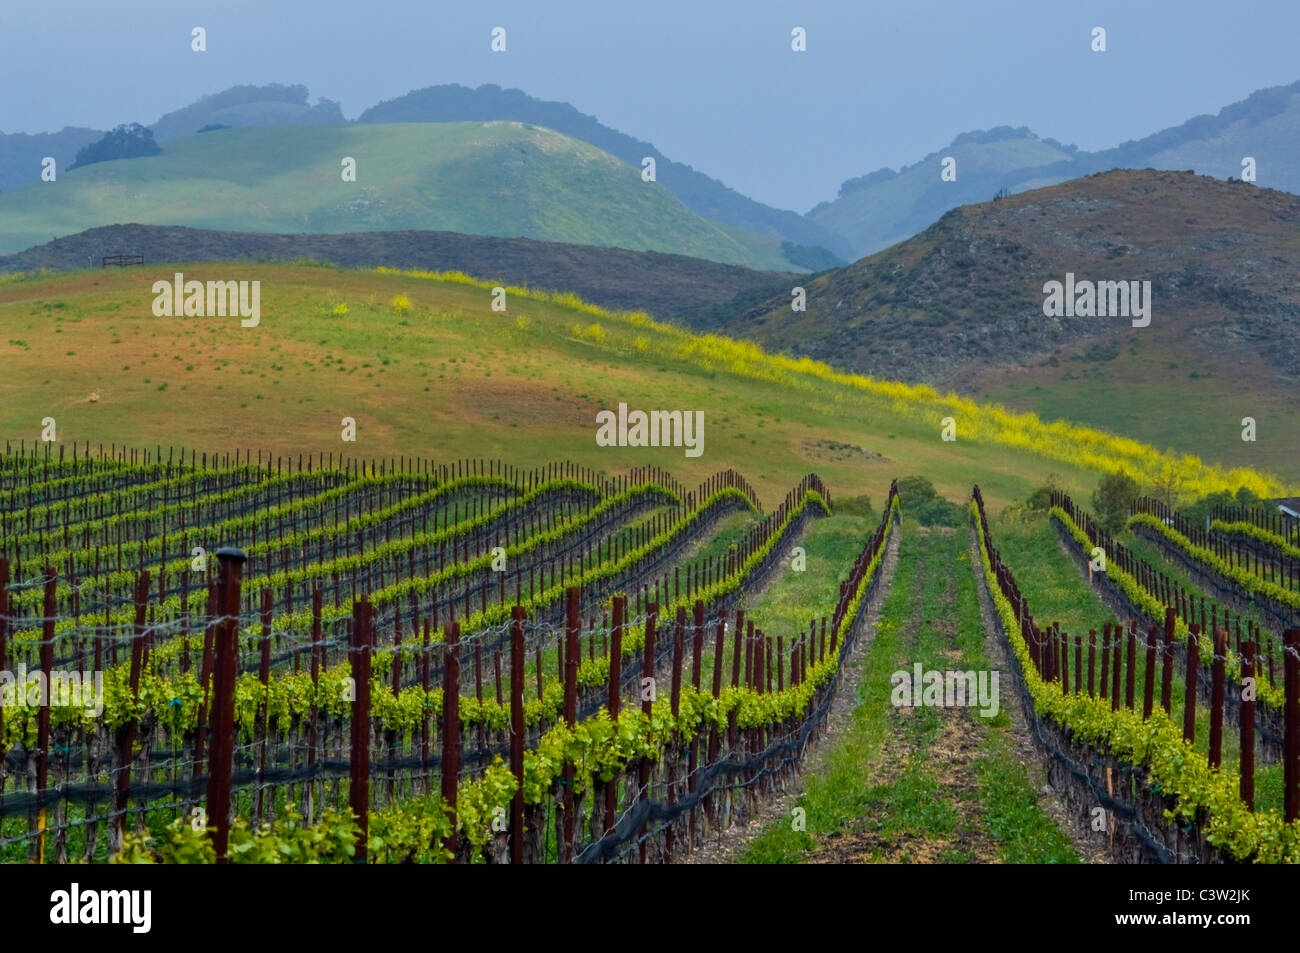 Rows of wine grape vines in vineyard and green hills in Spring, Edna Valley, San Luis Obispo County, California Stock Photo